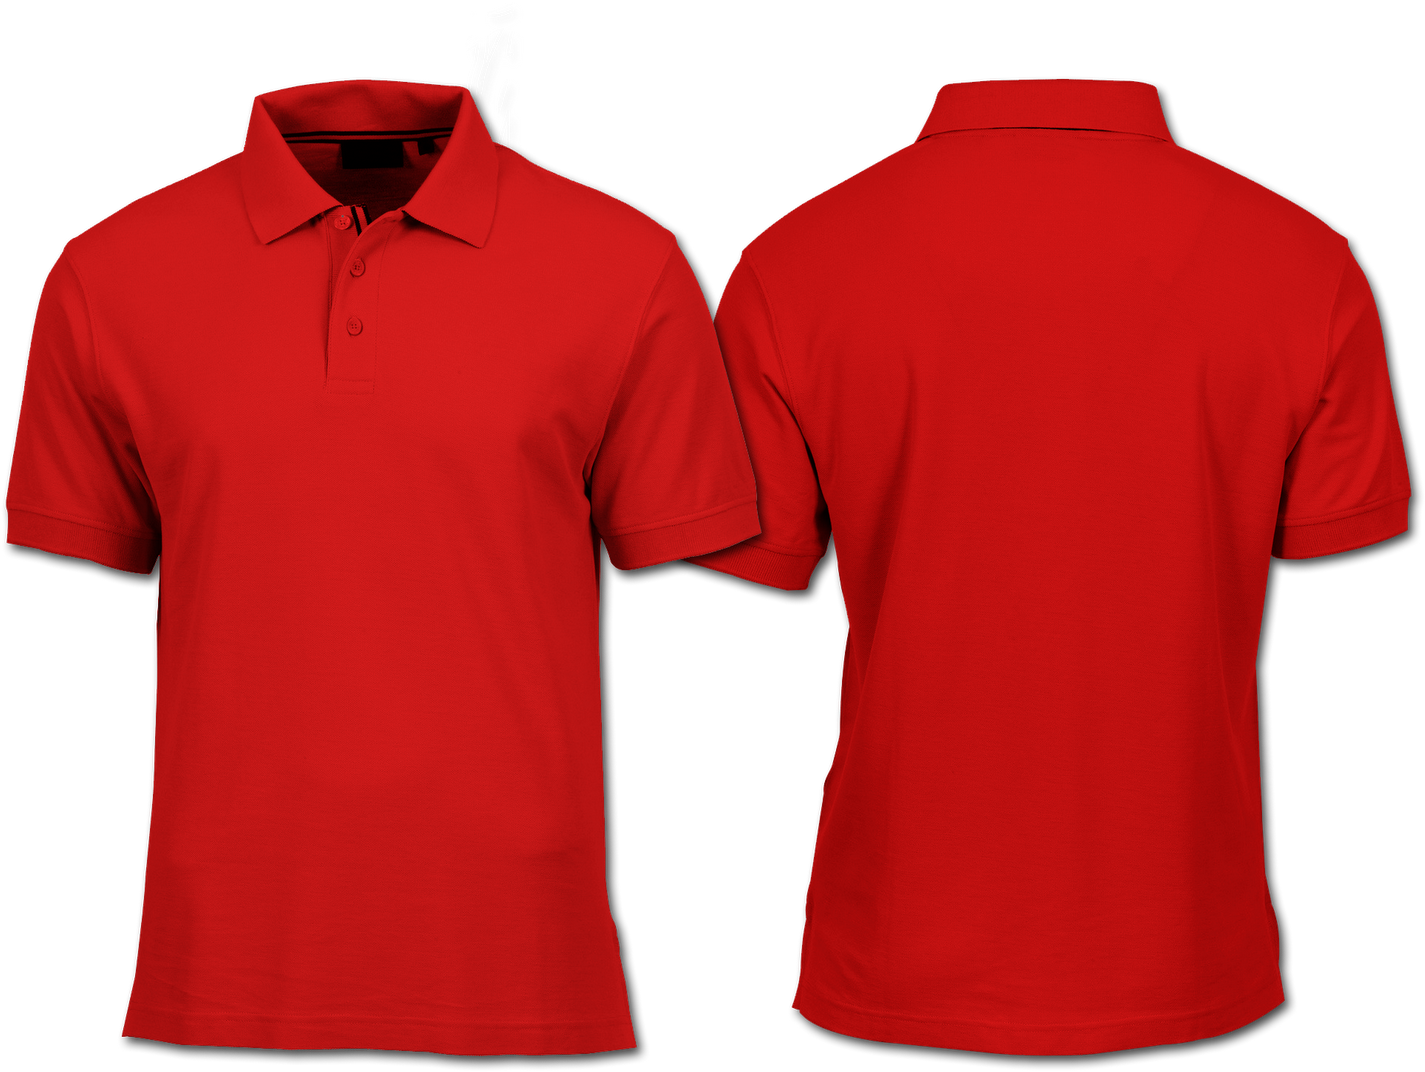 Gembel Keren - Red Polo Shirt Mockup Clipart (1600x1156), Png Download